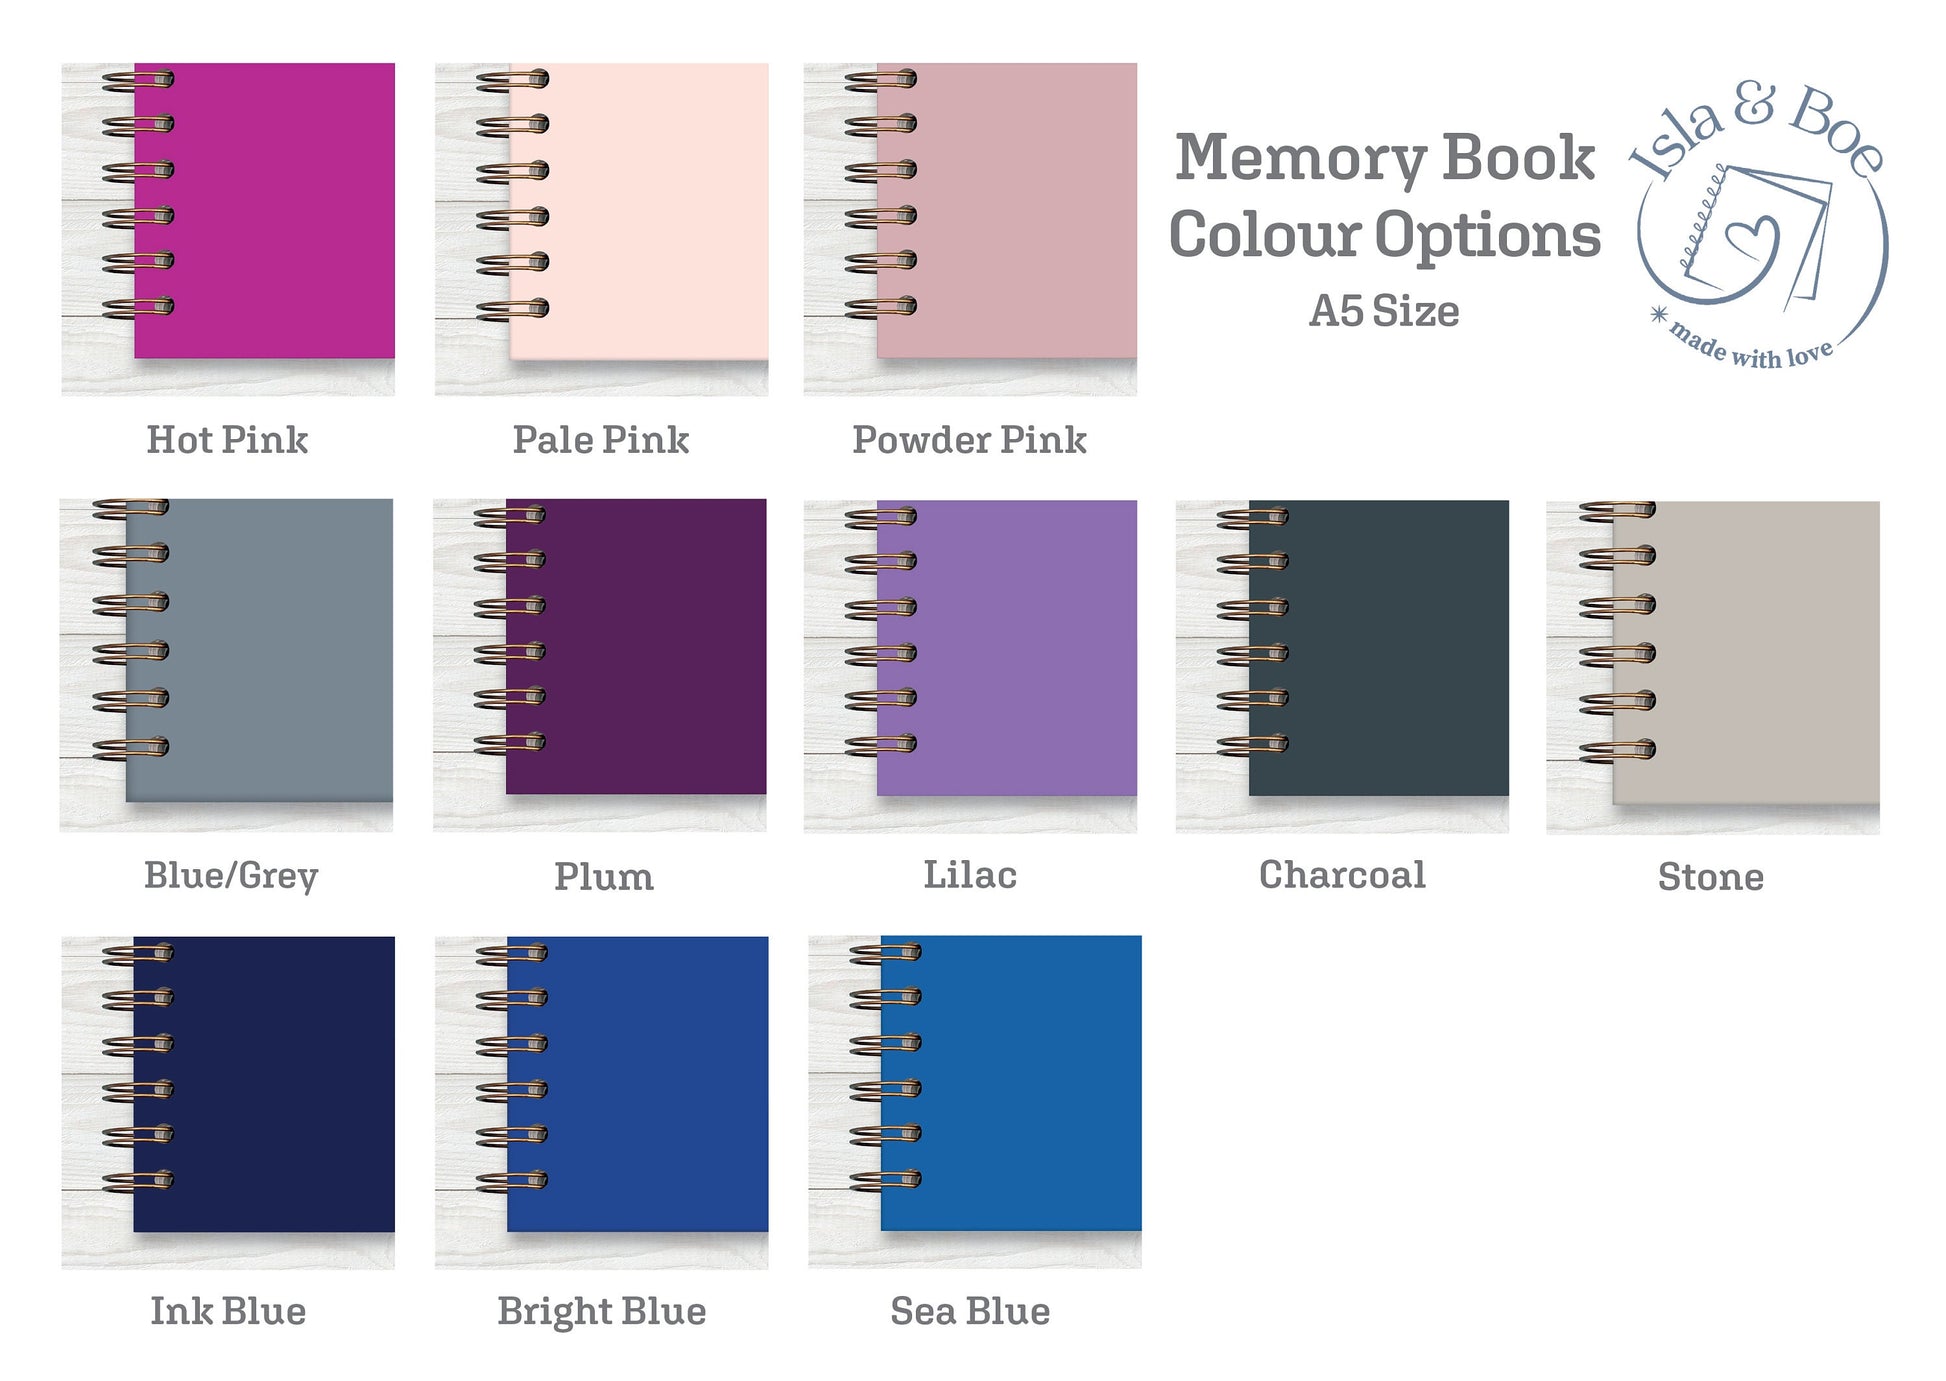 a chart of memory book colour options. Hot pink, Pale Pink, Powder Pink, Blue/Grey, Lilac, Charcoal, Stone, and Sea Blue